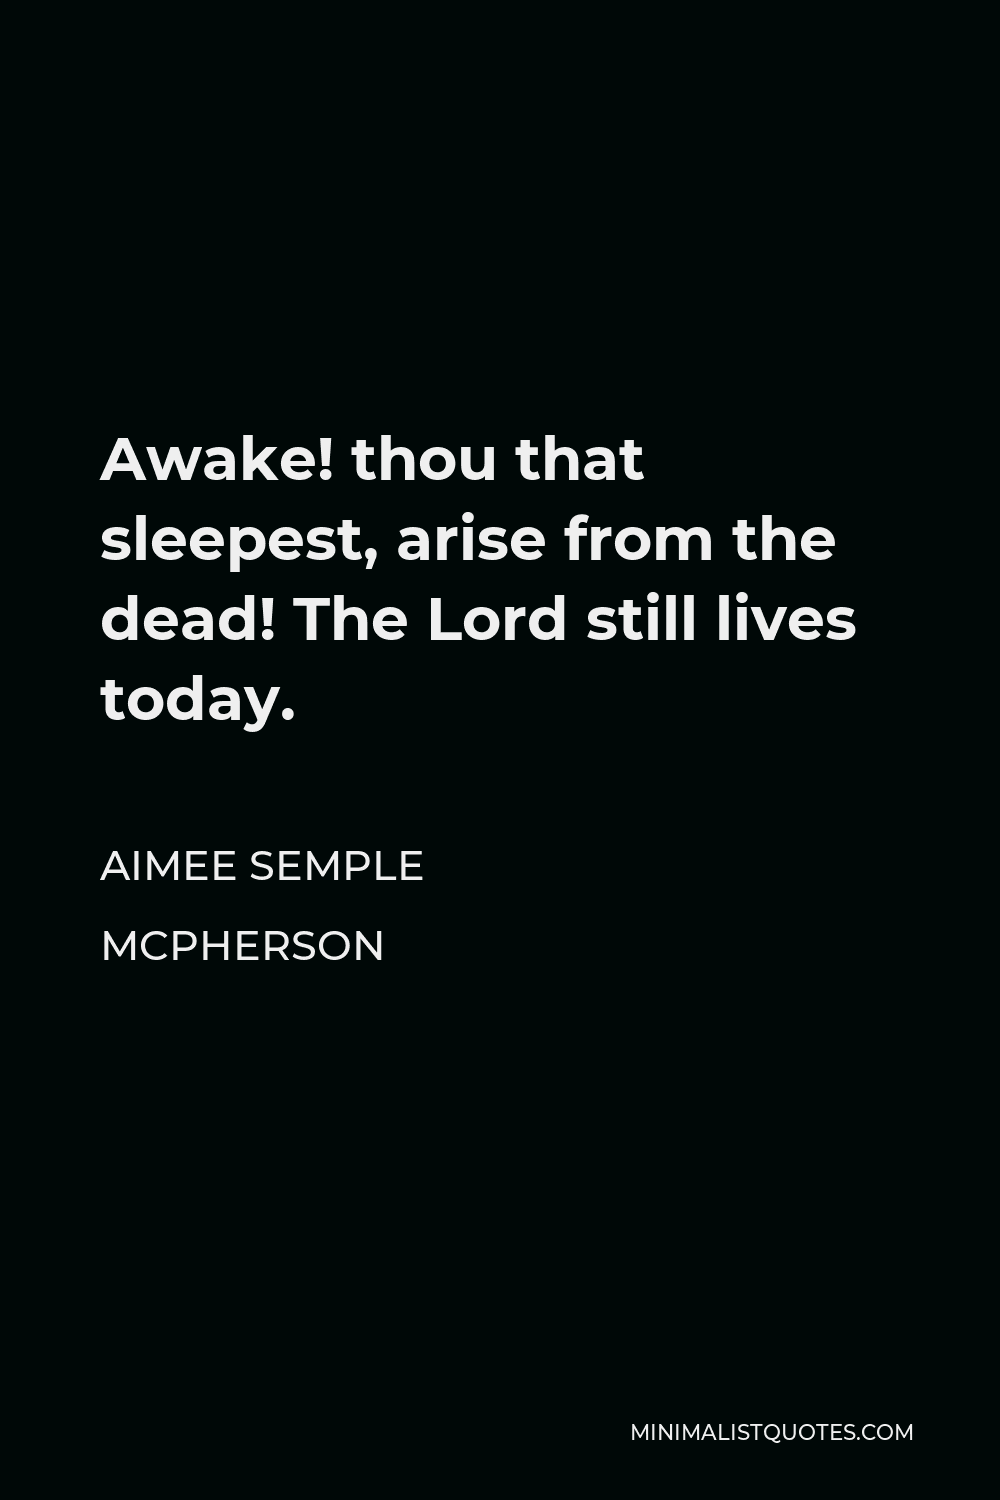 Aimee Semple McPherson Quote - Awake! thou that sleepest, arise from the dead! The Lord still lives today.